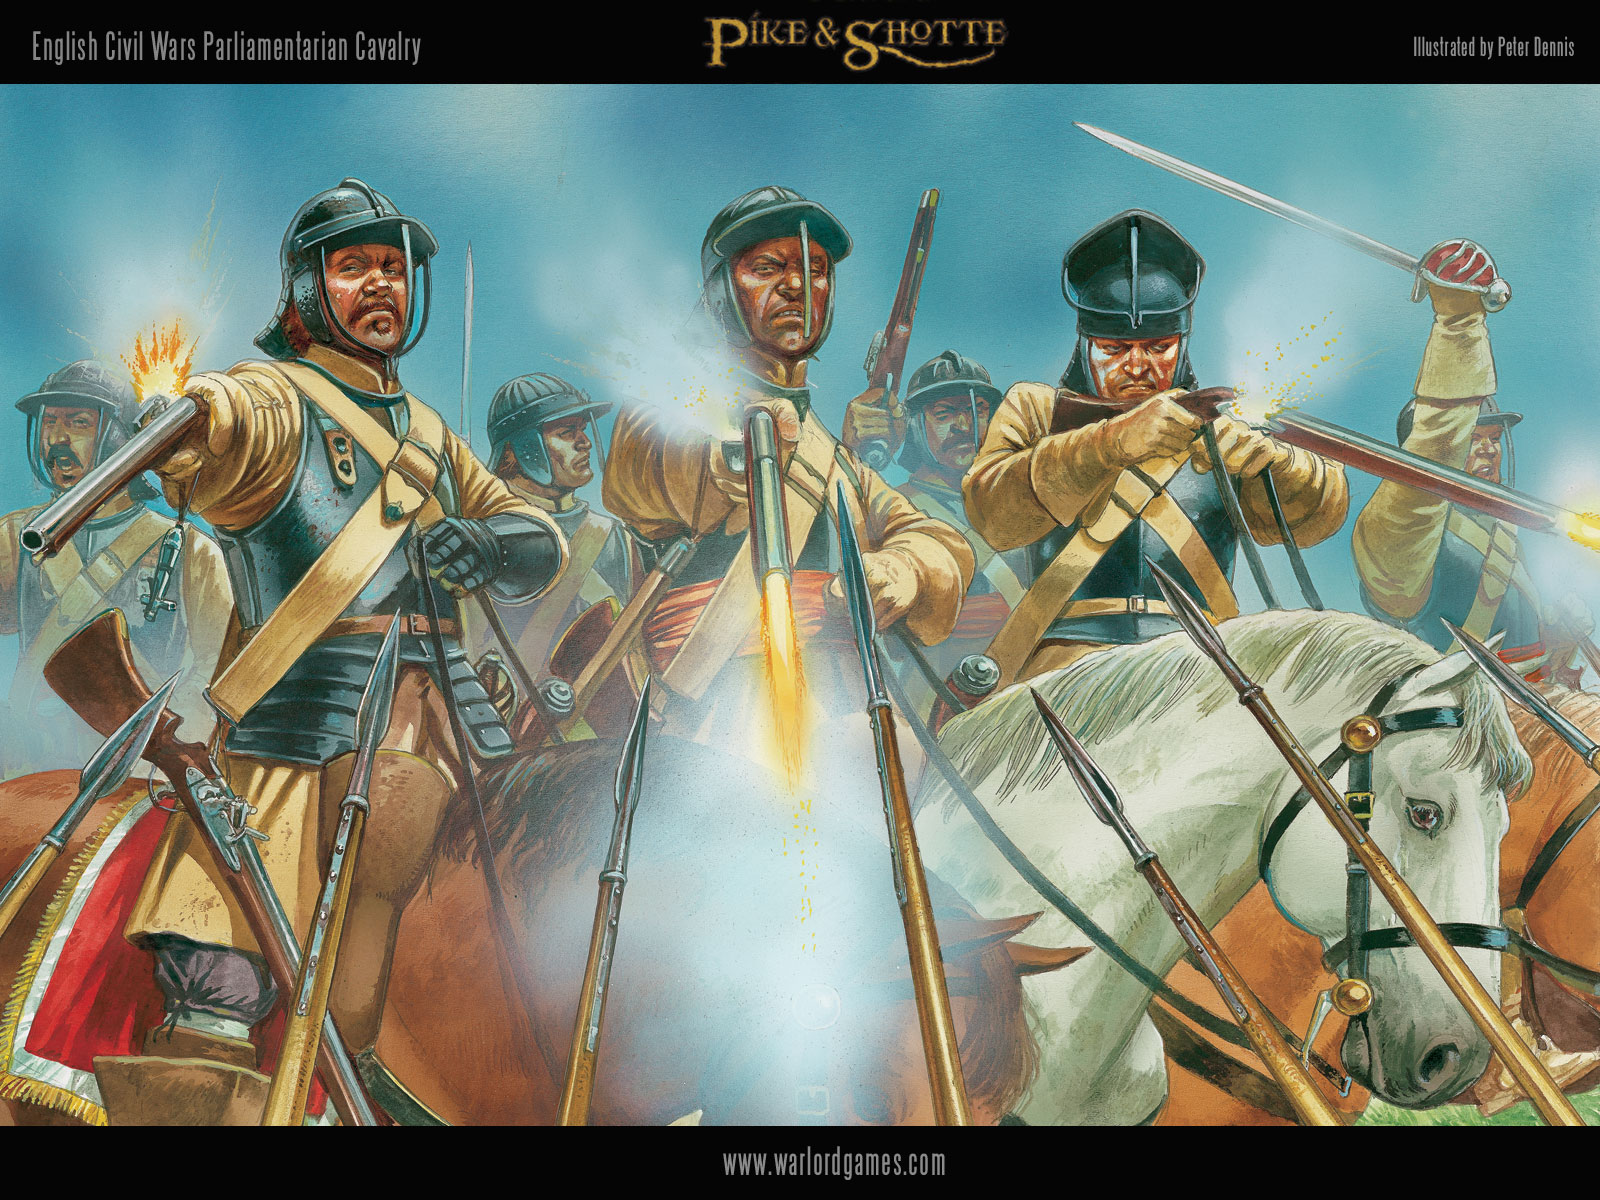 230 Cavalry Charge Stock Photos Pictures  RoyaltyFree Images  iStock   Calvary Battle Take action